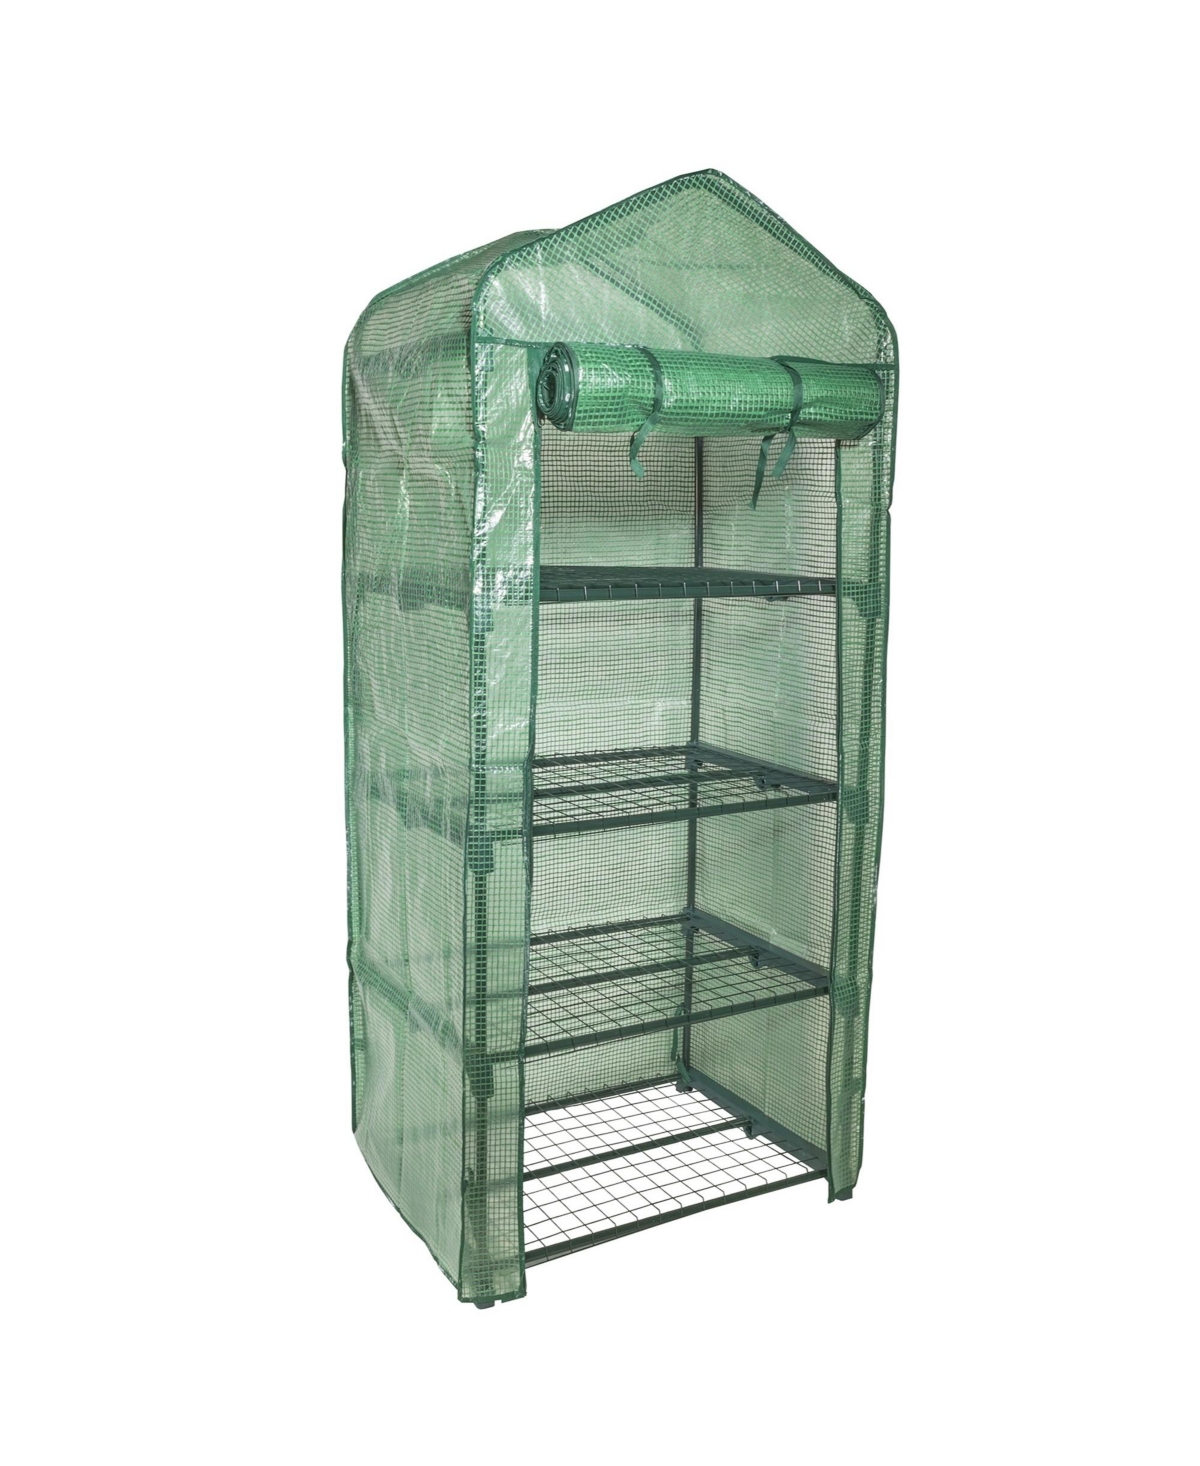 Personal Plastic Indoor Standing Greenhouse For Seed Starting and Propagation, Frost Protection Green, Small, 27 Inches x 19 Inches x